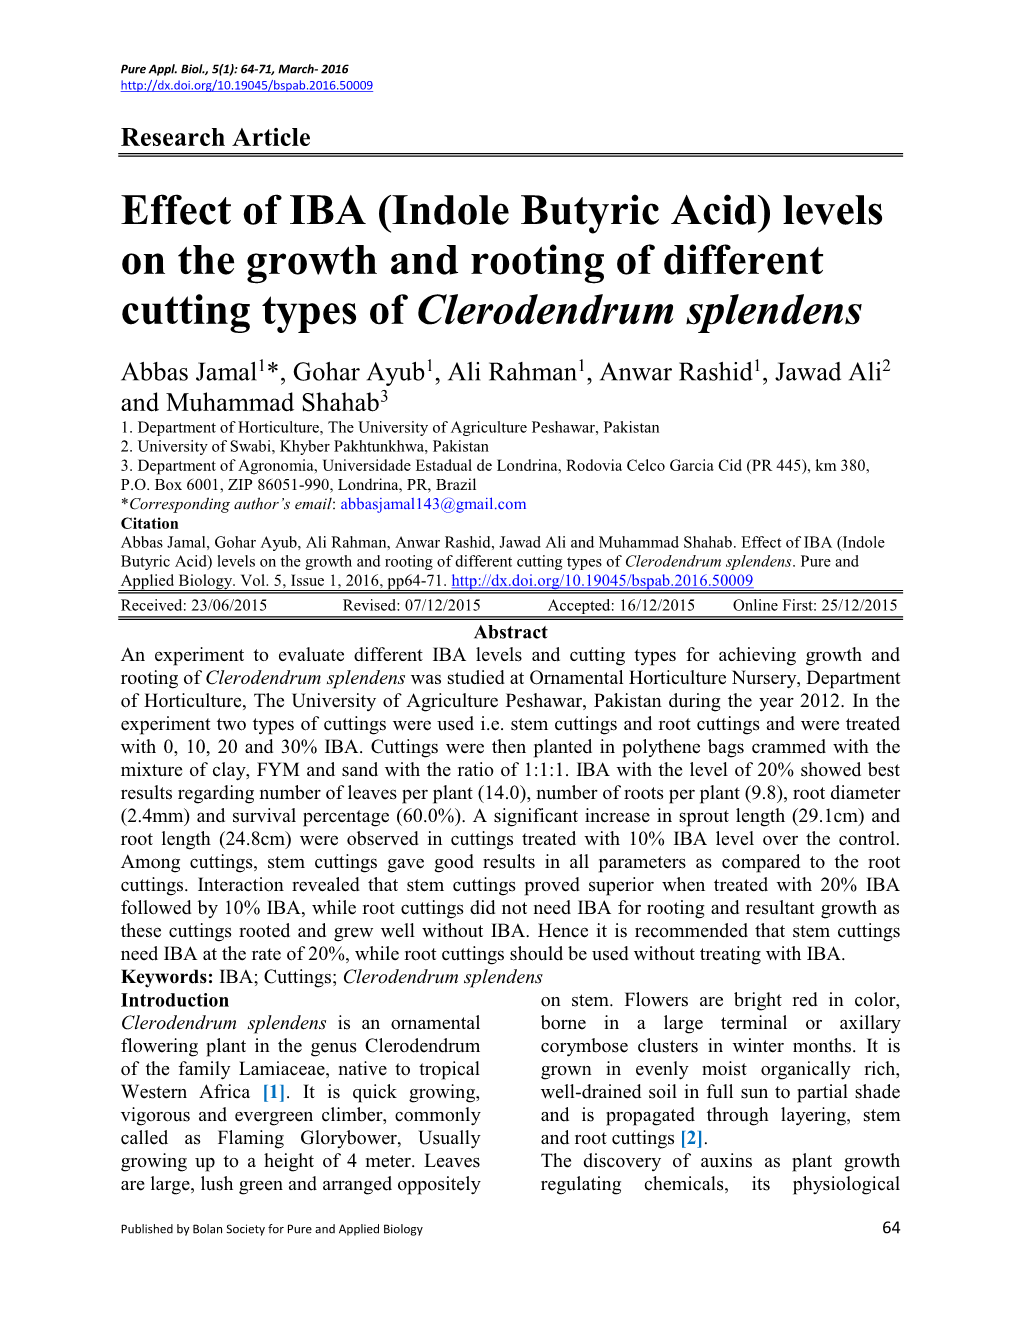 Effect of IBA (Indole Butyric Acid) Levels on the Growth and Rooting of Different Cutting Types of Clerodendrum Splendens